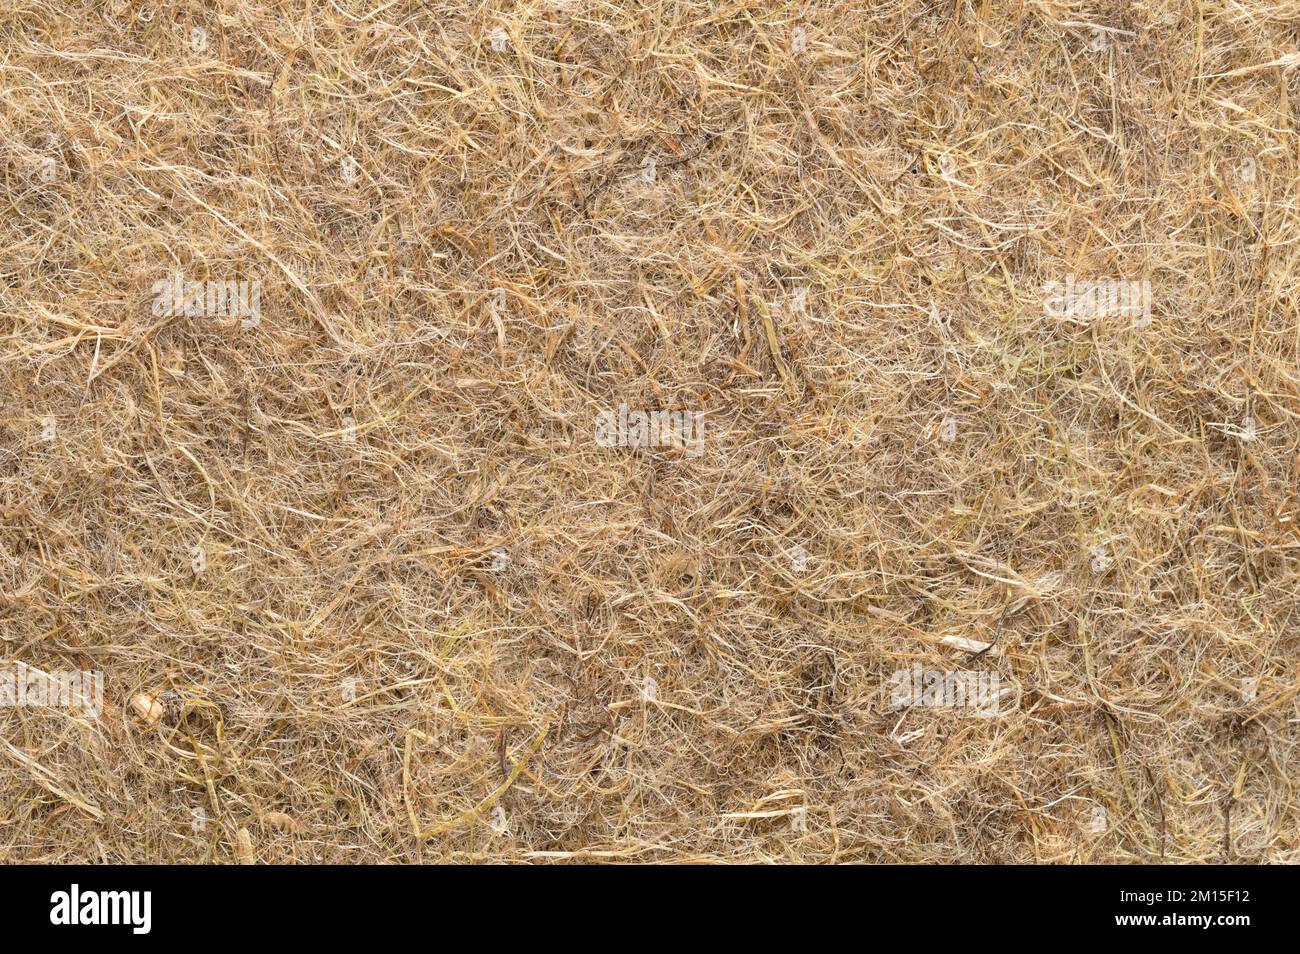 Hemp growing mat, surface and background, close-up, from above. Growth medium, made of industrial and natural hemp fibres. Stock Photo